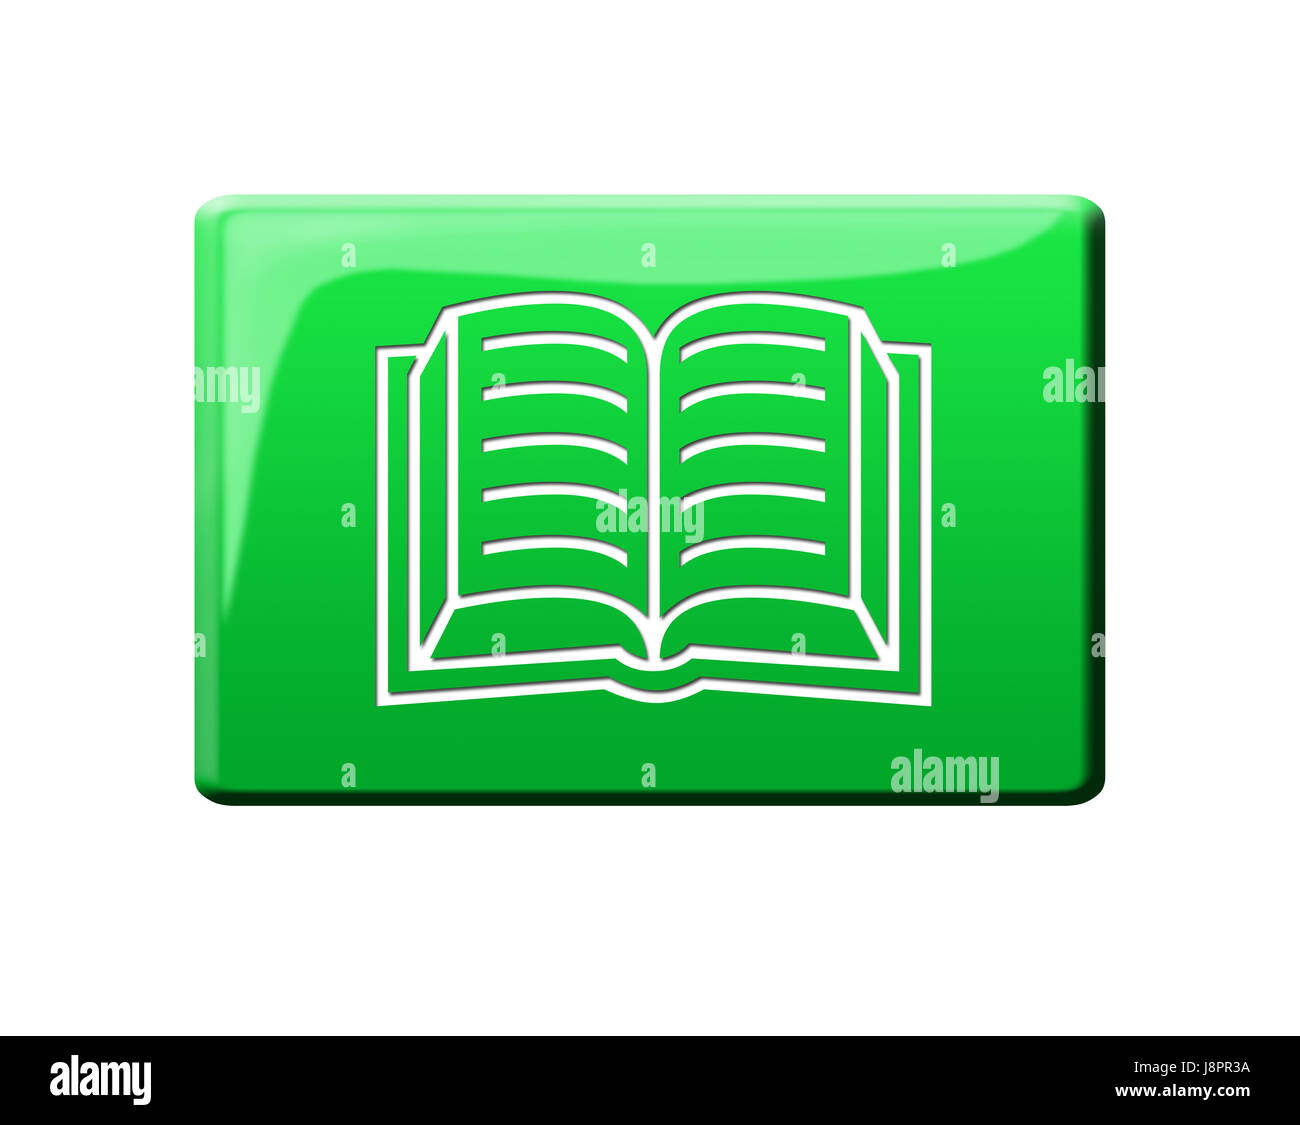 button, catalogue, scanning, reads, book, pictogram, symbol, pictograph, trade Stock Photo